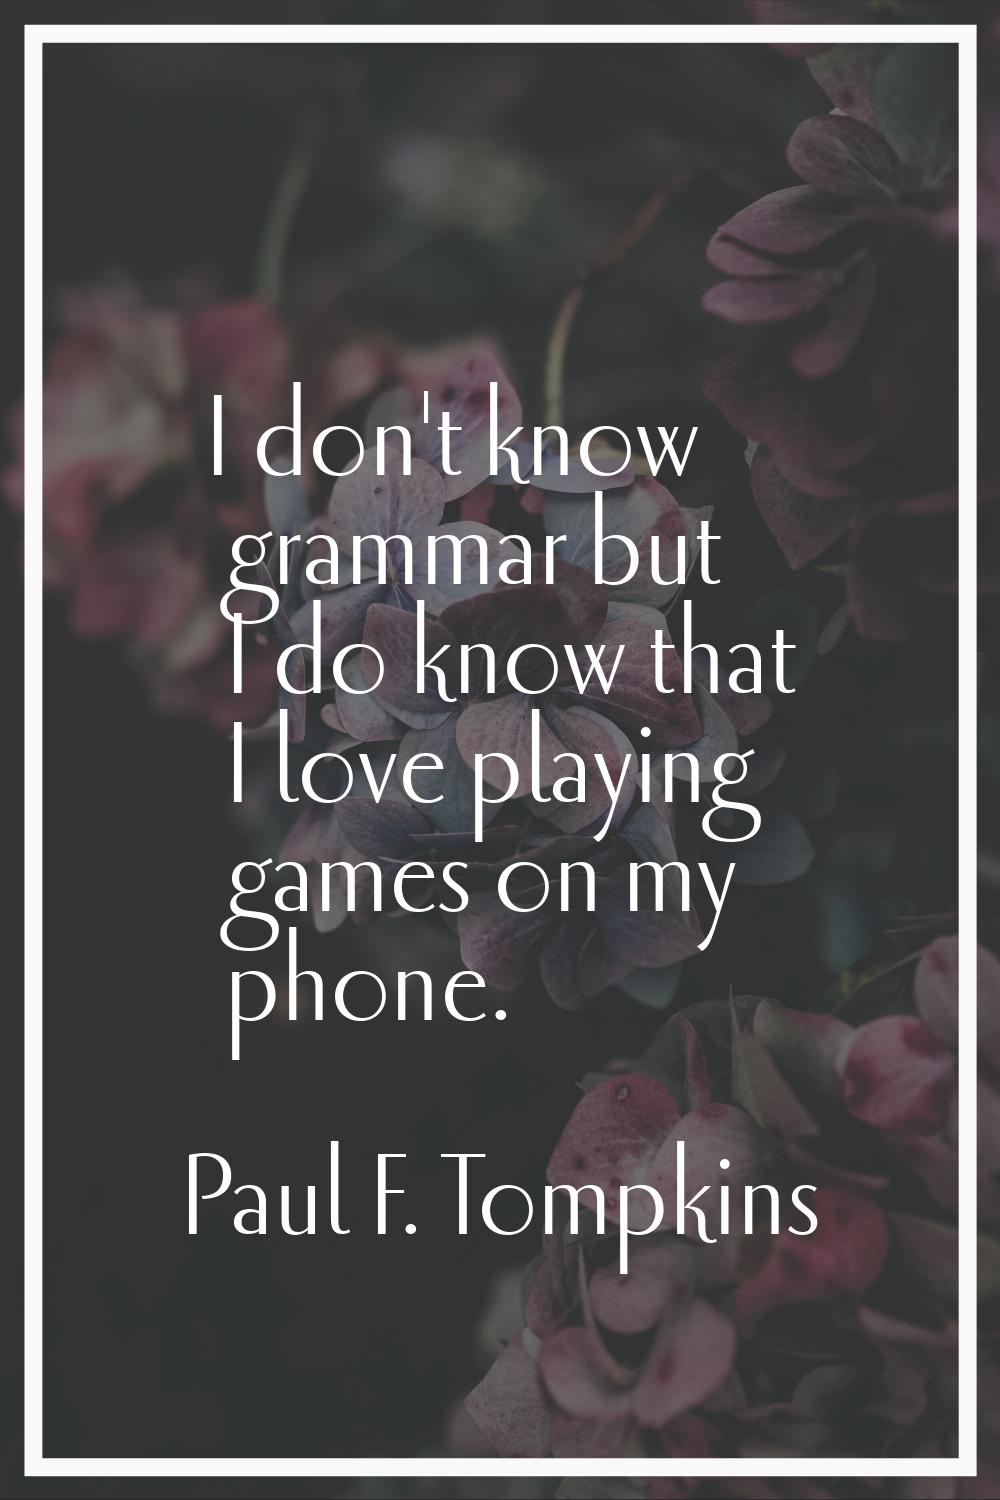 I don't know grammar but I do know that I love playing games on my phone.